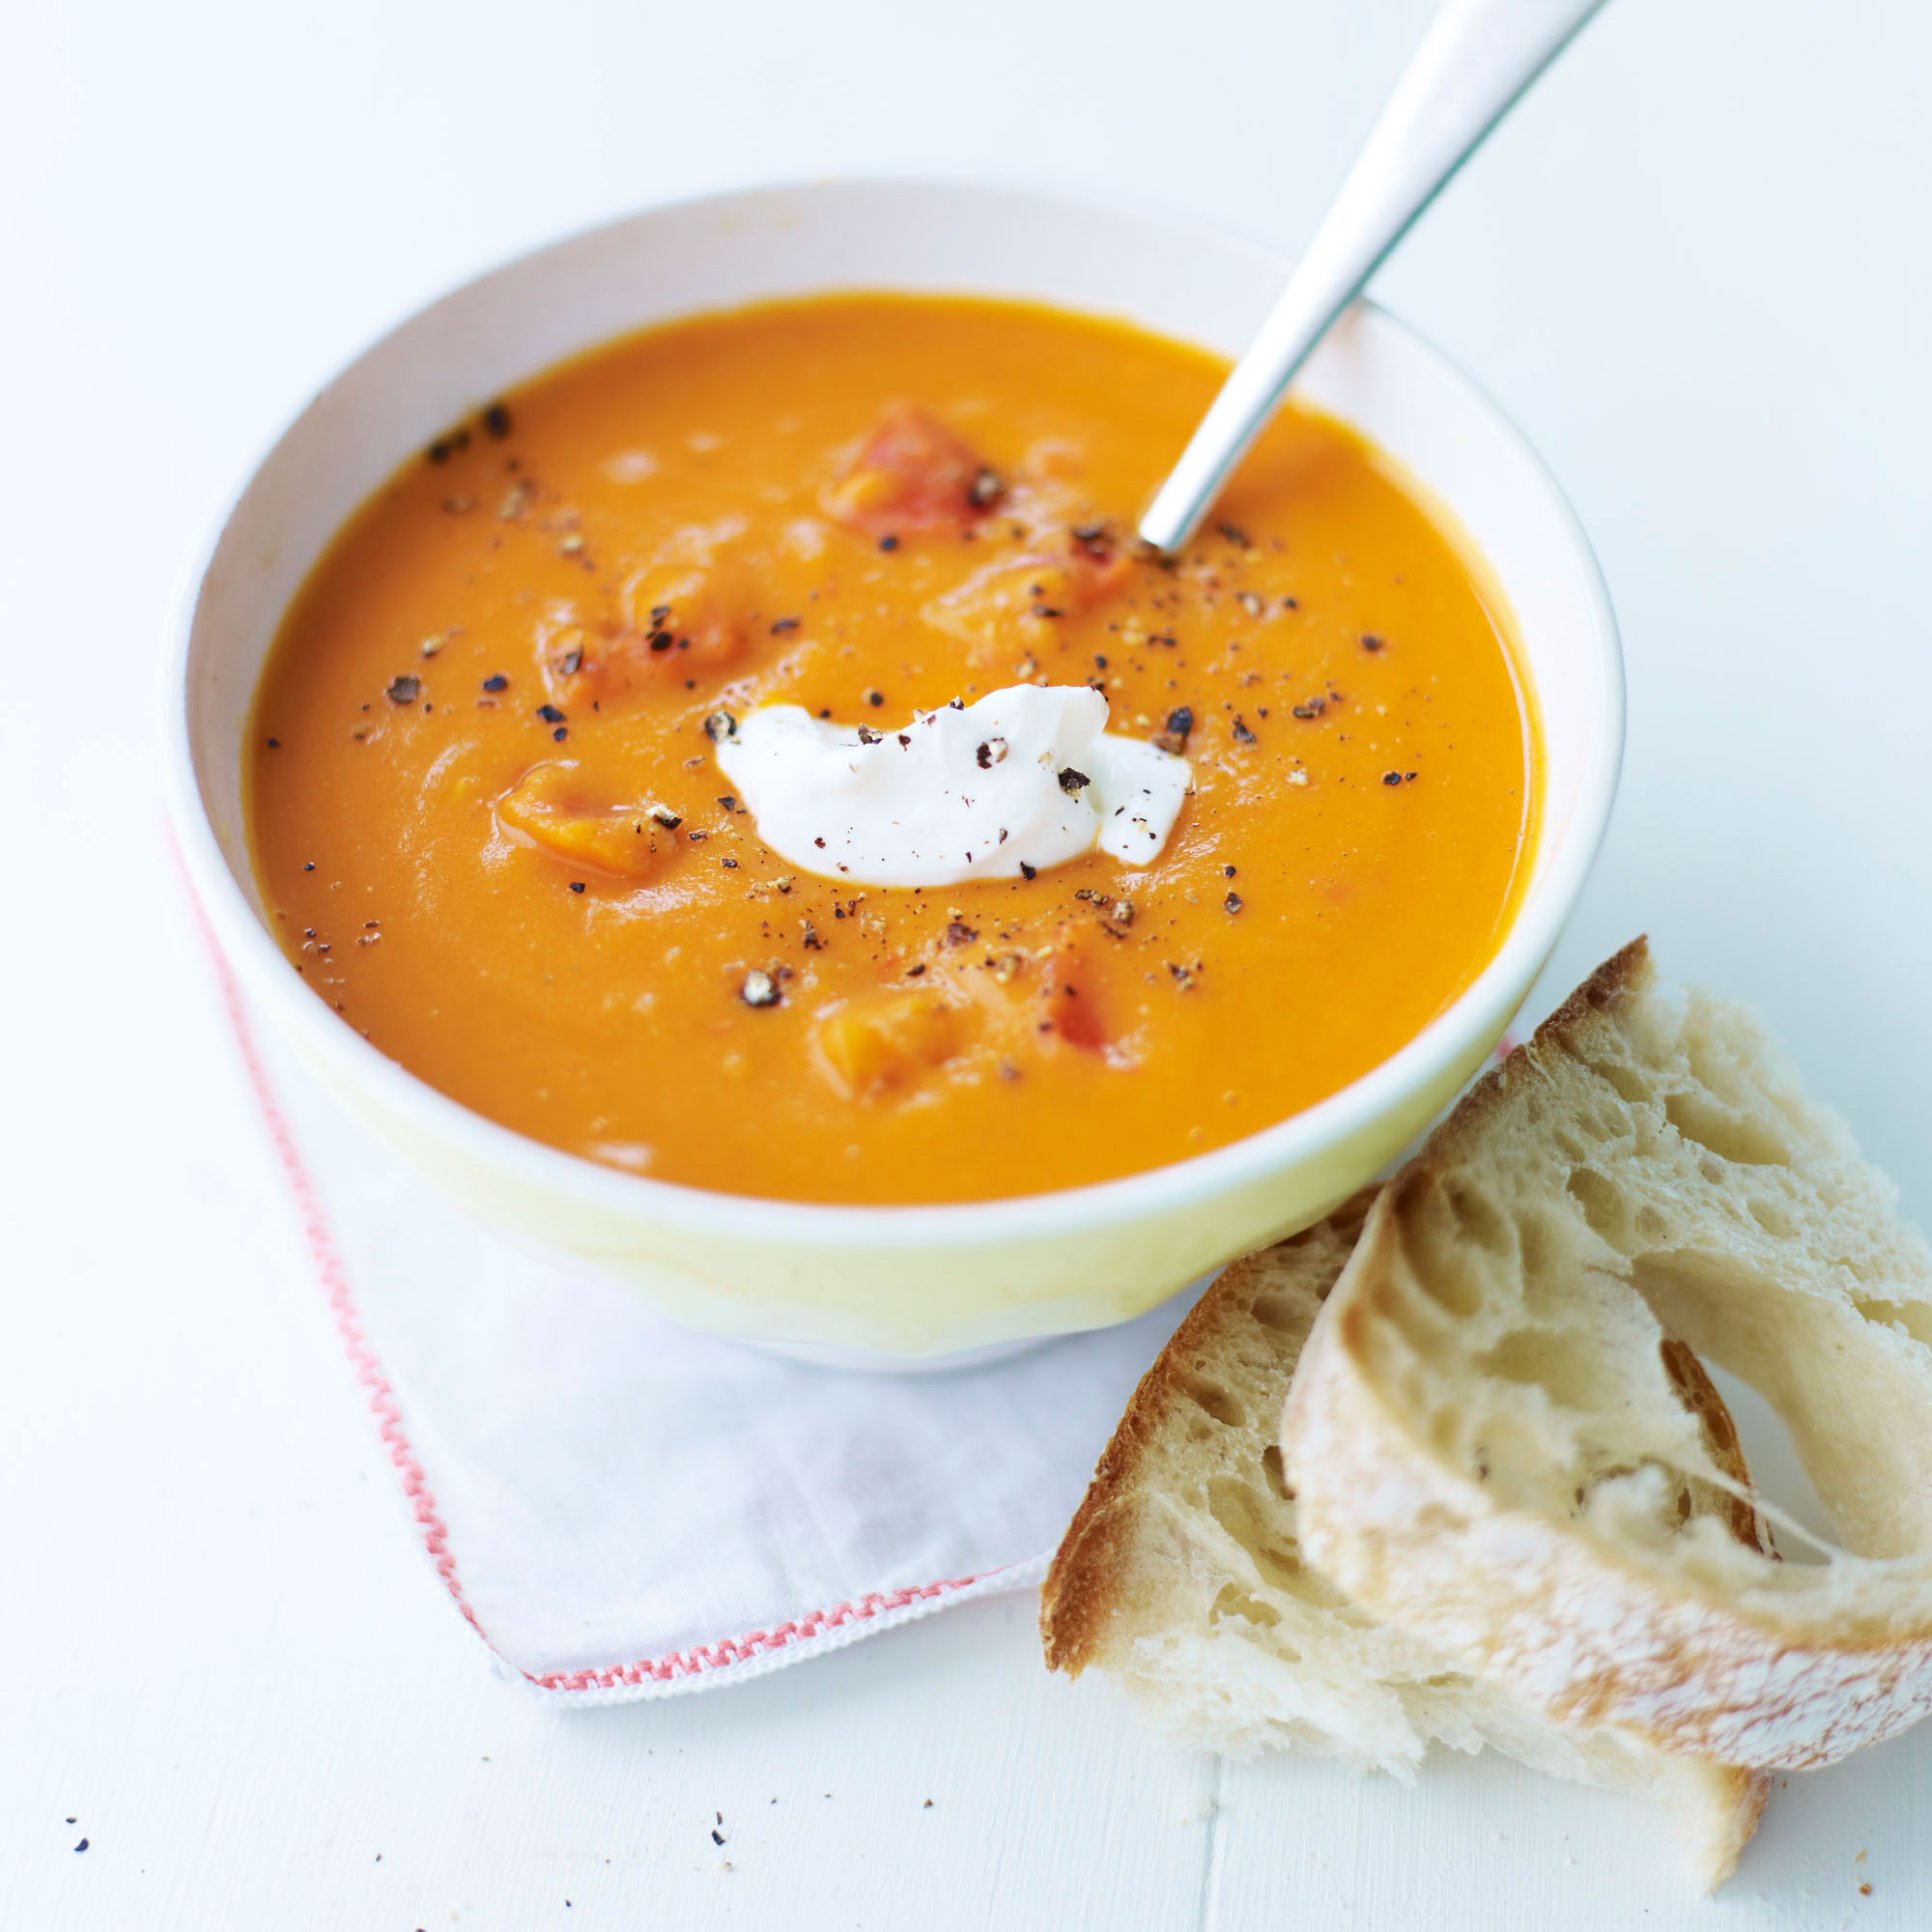 Spicy red pepper and lentil soup recipe